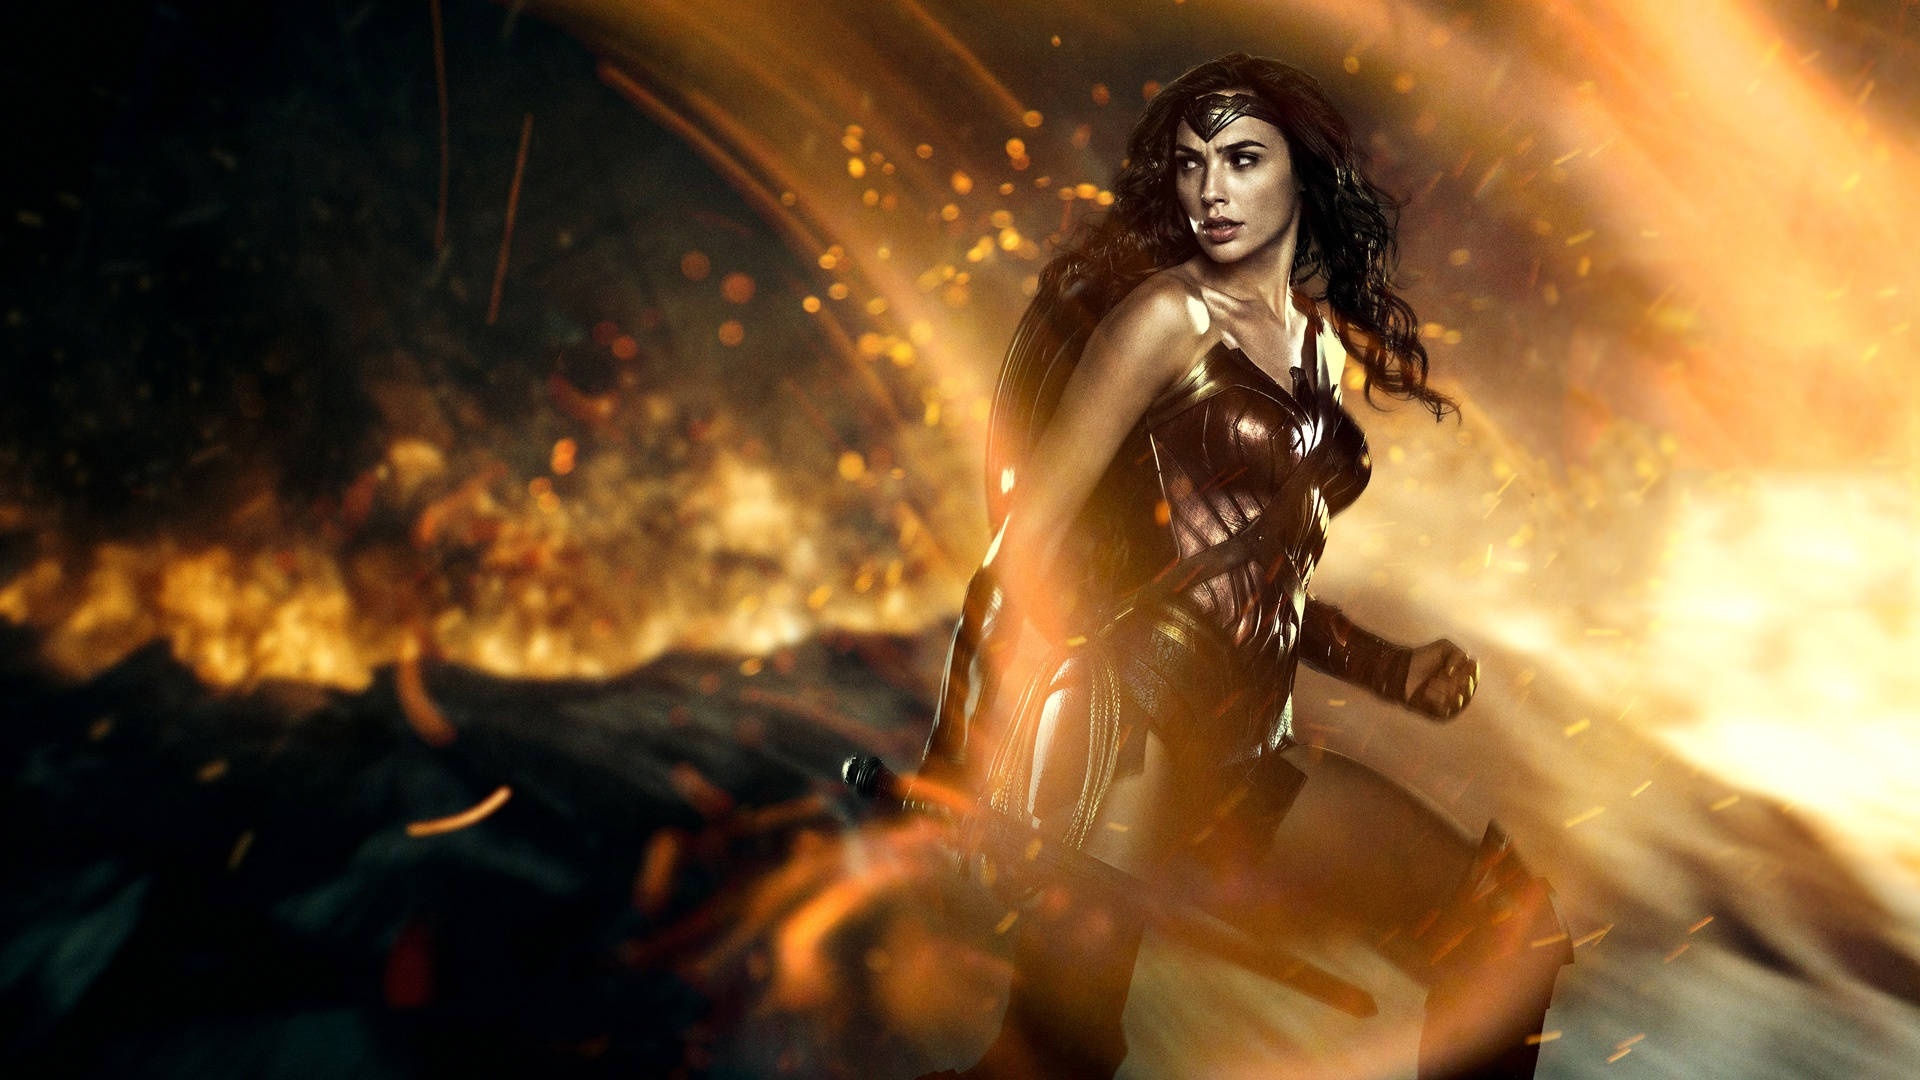 "Wonder Woman charges towards Justice with a Fire in her Heart" Wallpaper